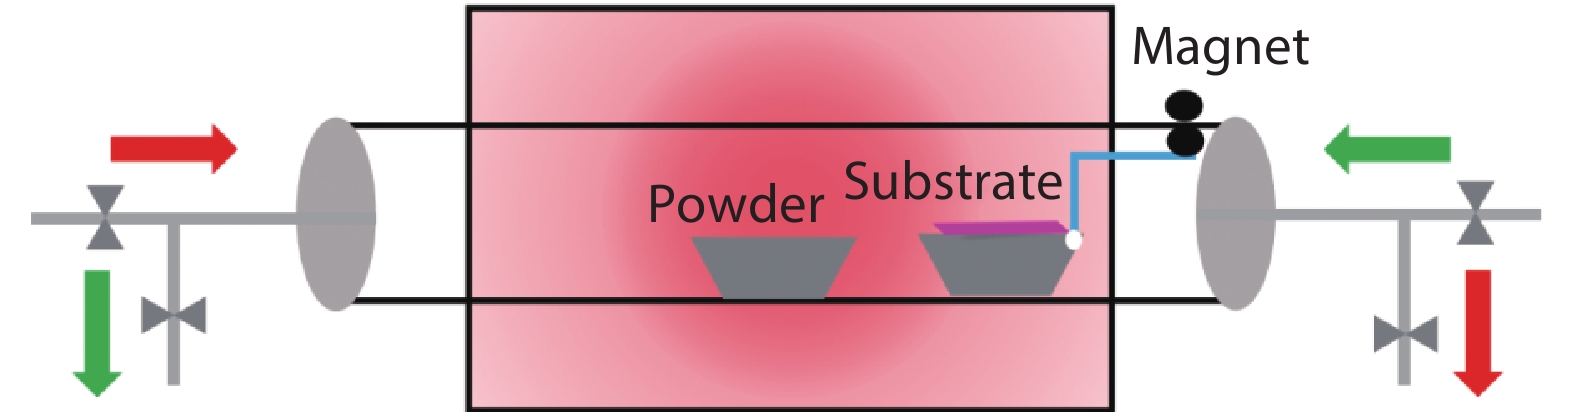 (Color online) Schematic of a modified bidirectional flow CVD system.